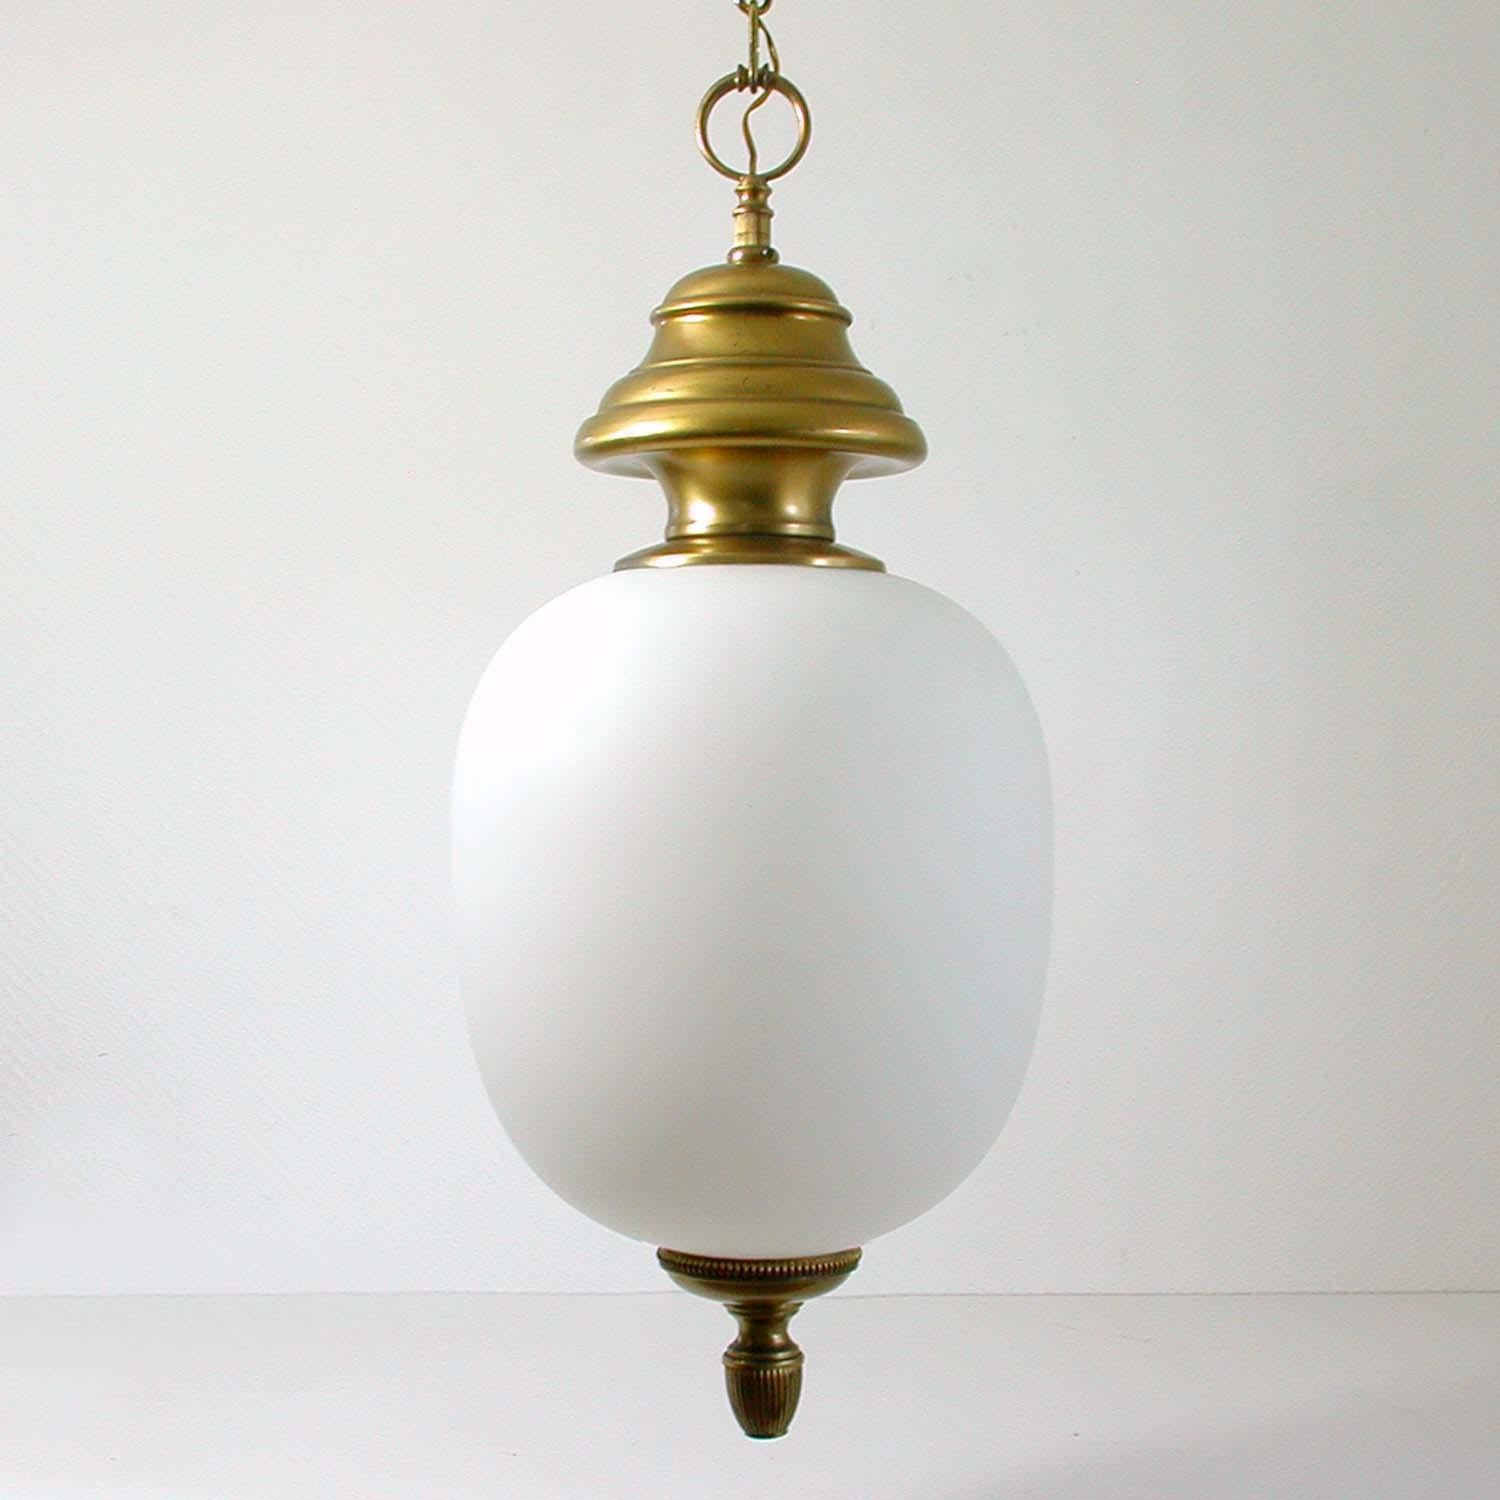 This elegant Italian chandelier / lantern was designed and manufactured by Azucena in the 1950s.

It has got a beautiful white blown satin opaline glass lamp shade, the frame is made of patinated brass.

The electrical system is of the time. The